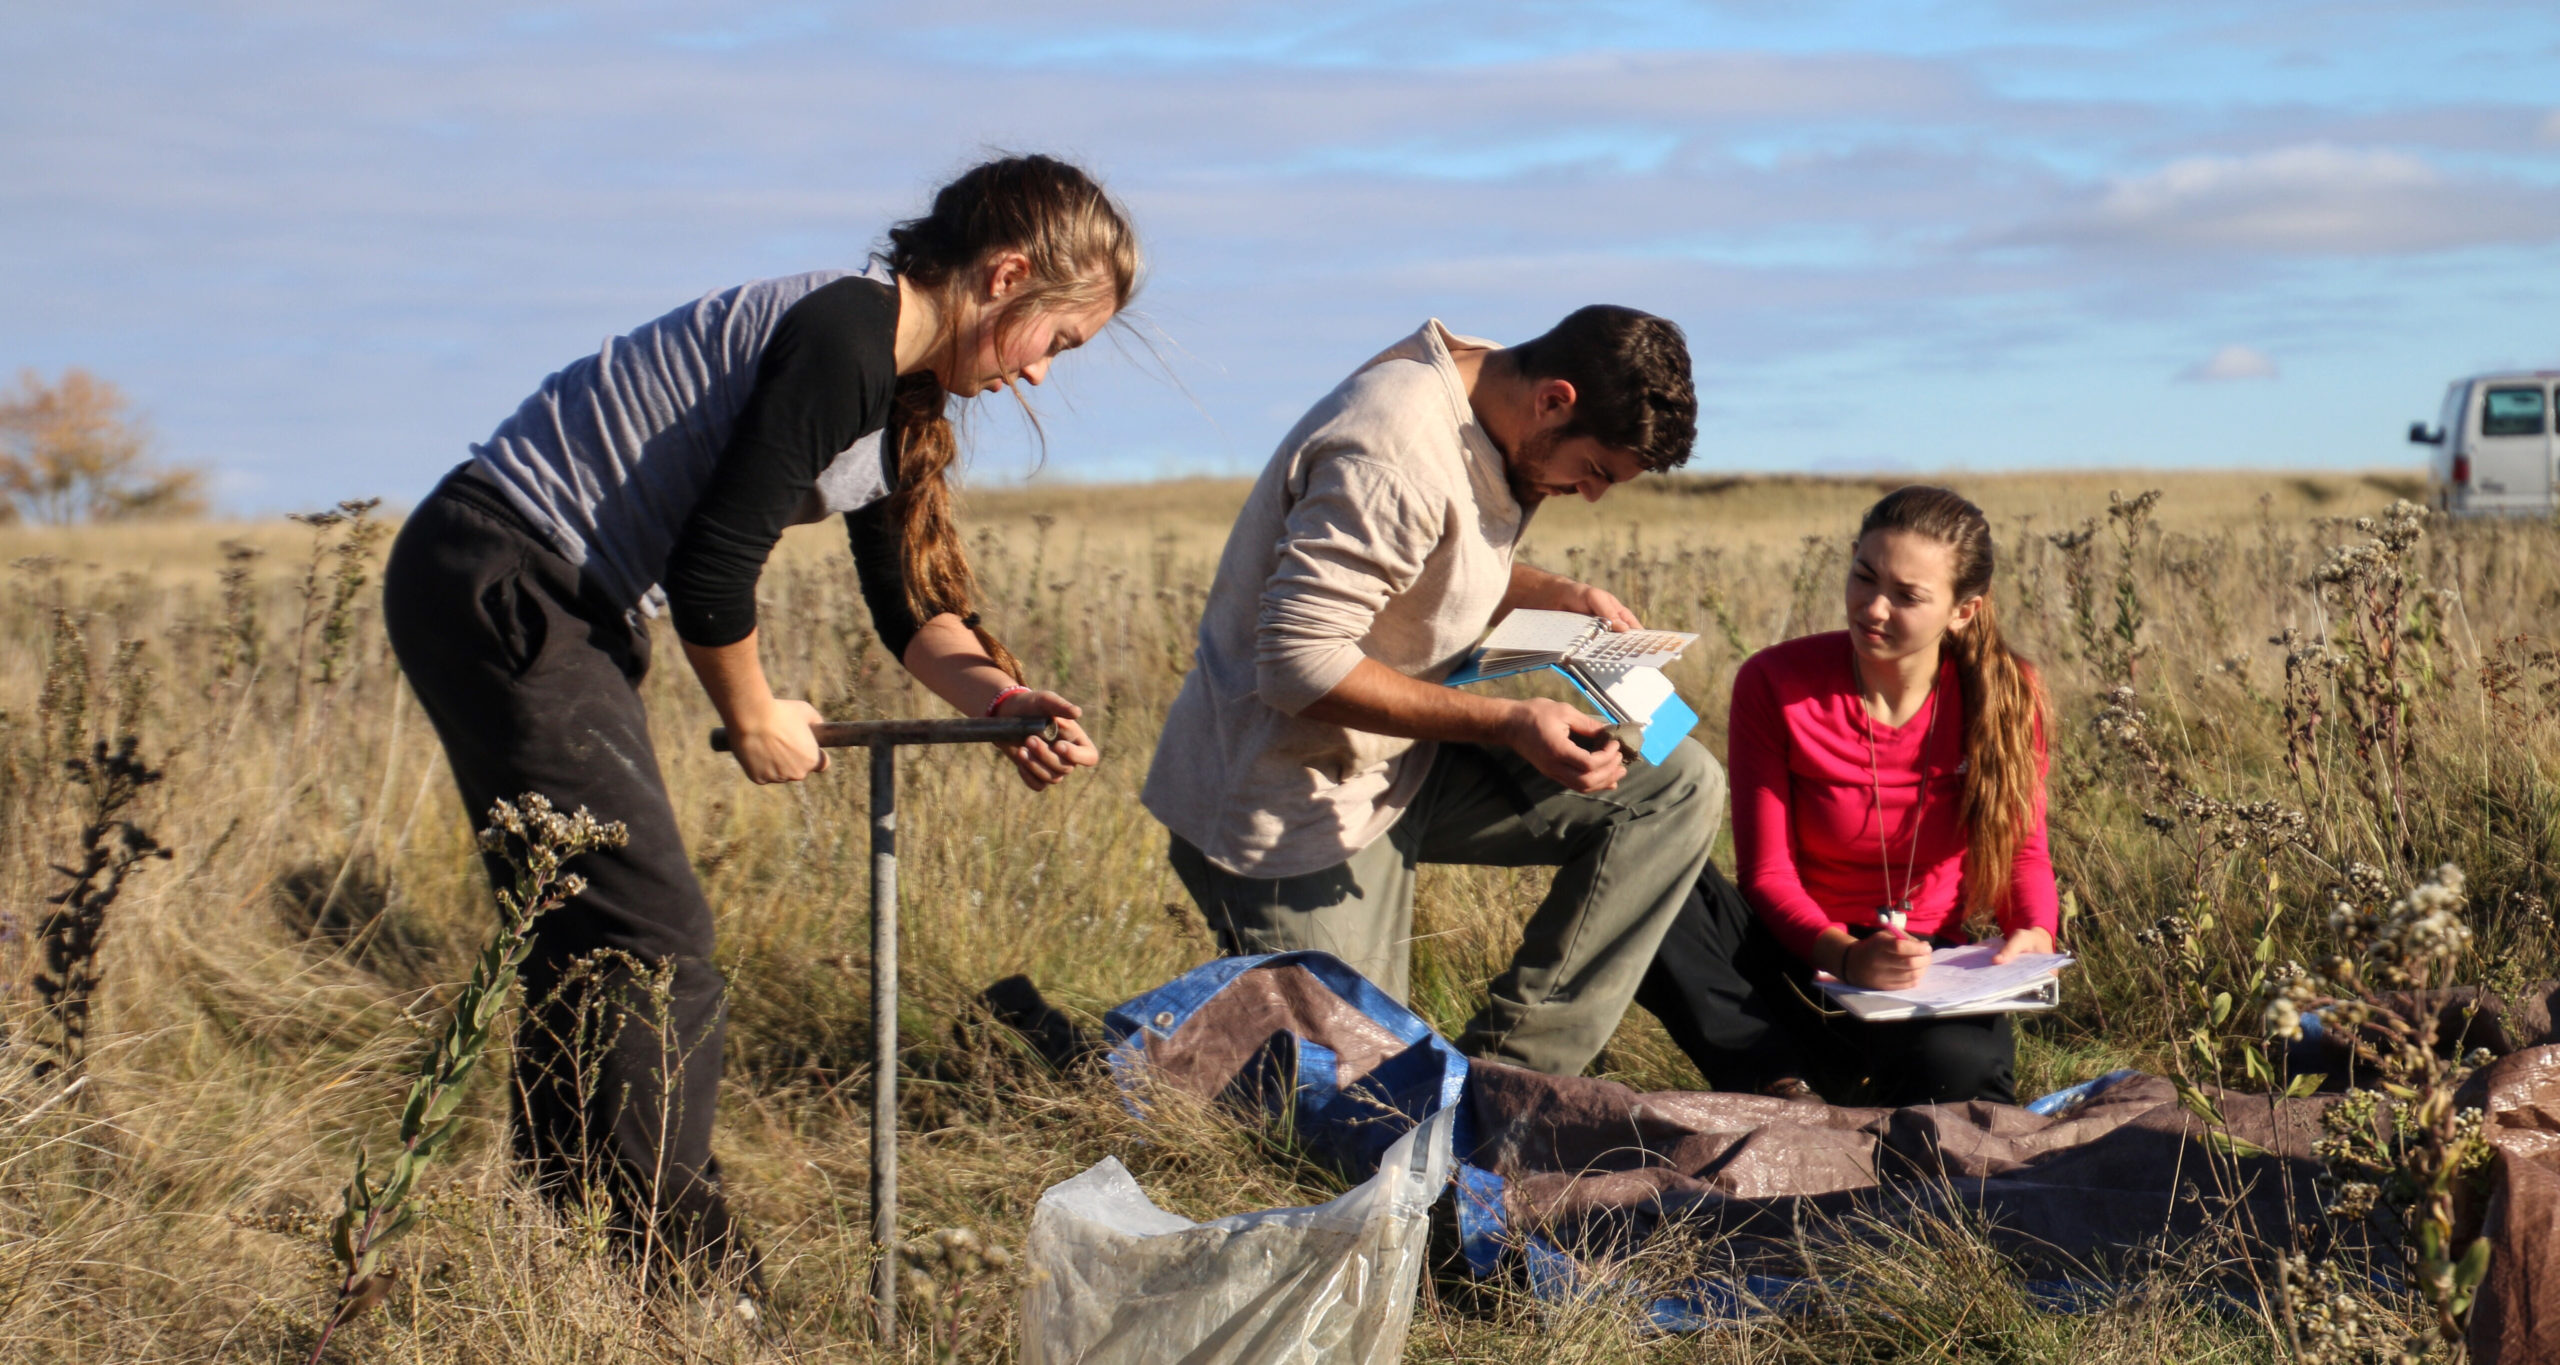 Students Shayna Thostenson, Jack Kellner and Sarah Howe record soil samples in October 2016 at The Nature Conservancy's John E. Williams Preserve. Photo by Noelle Laske '20.